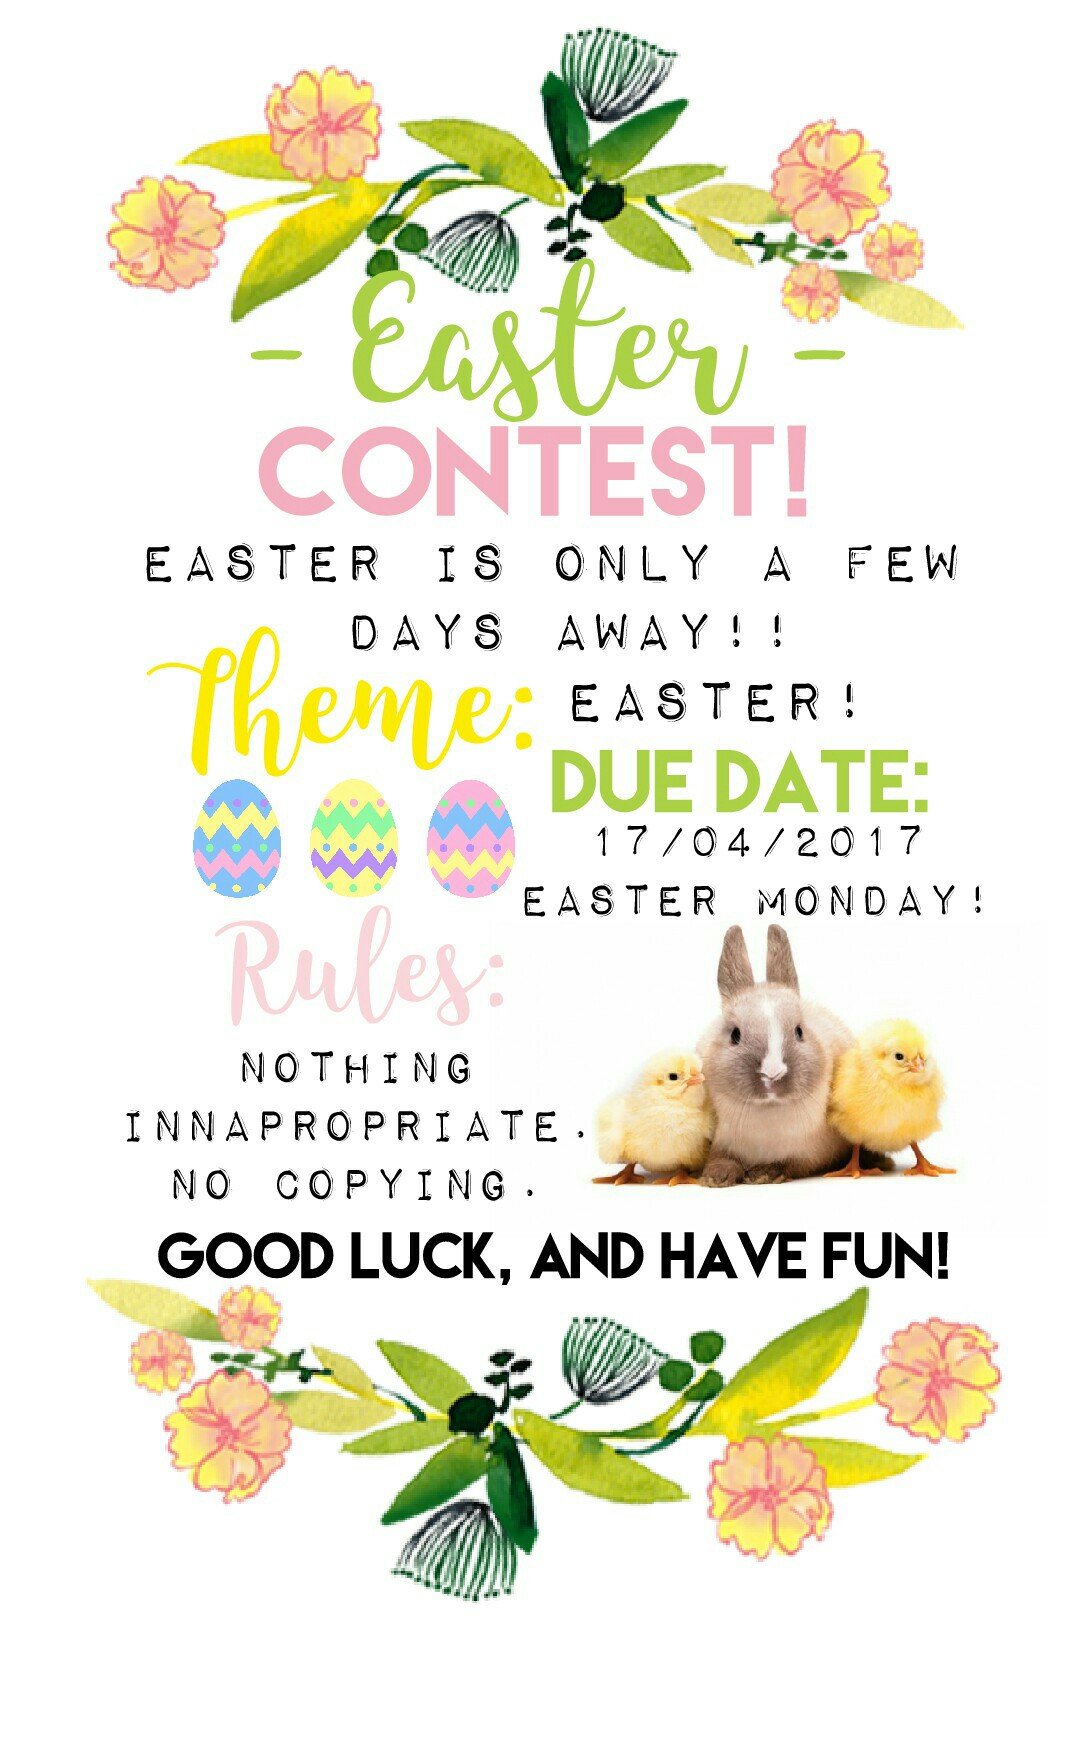 Easter contest!🐰🐣🌸💐
Wishing you all a happy holiday! xx